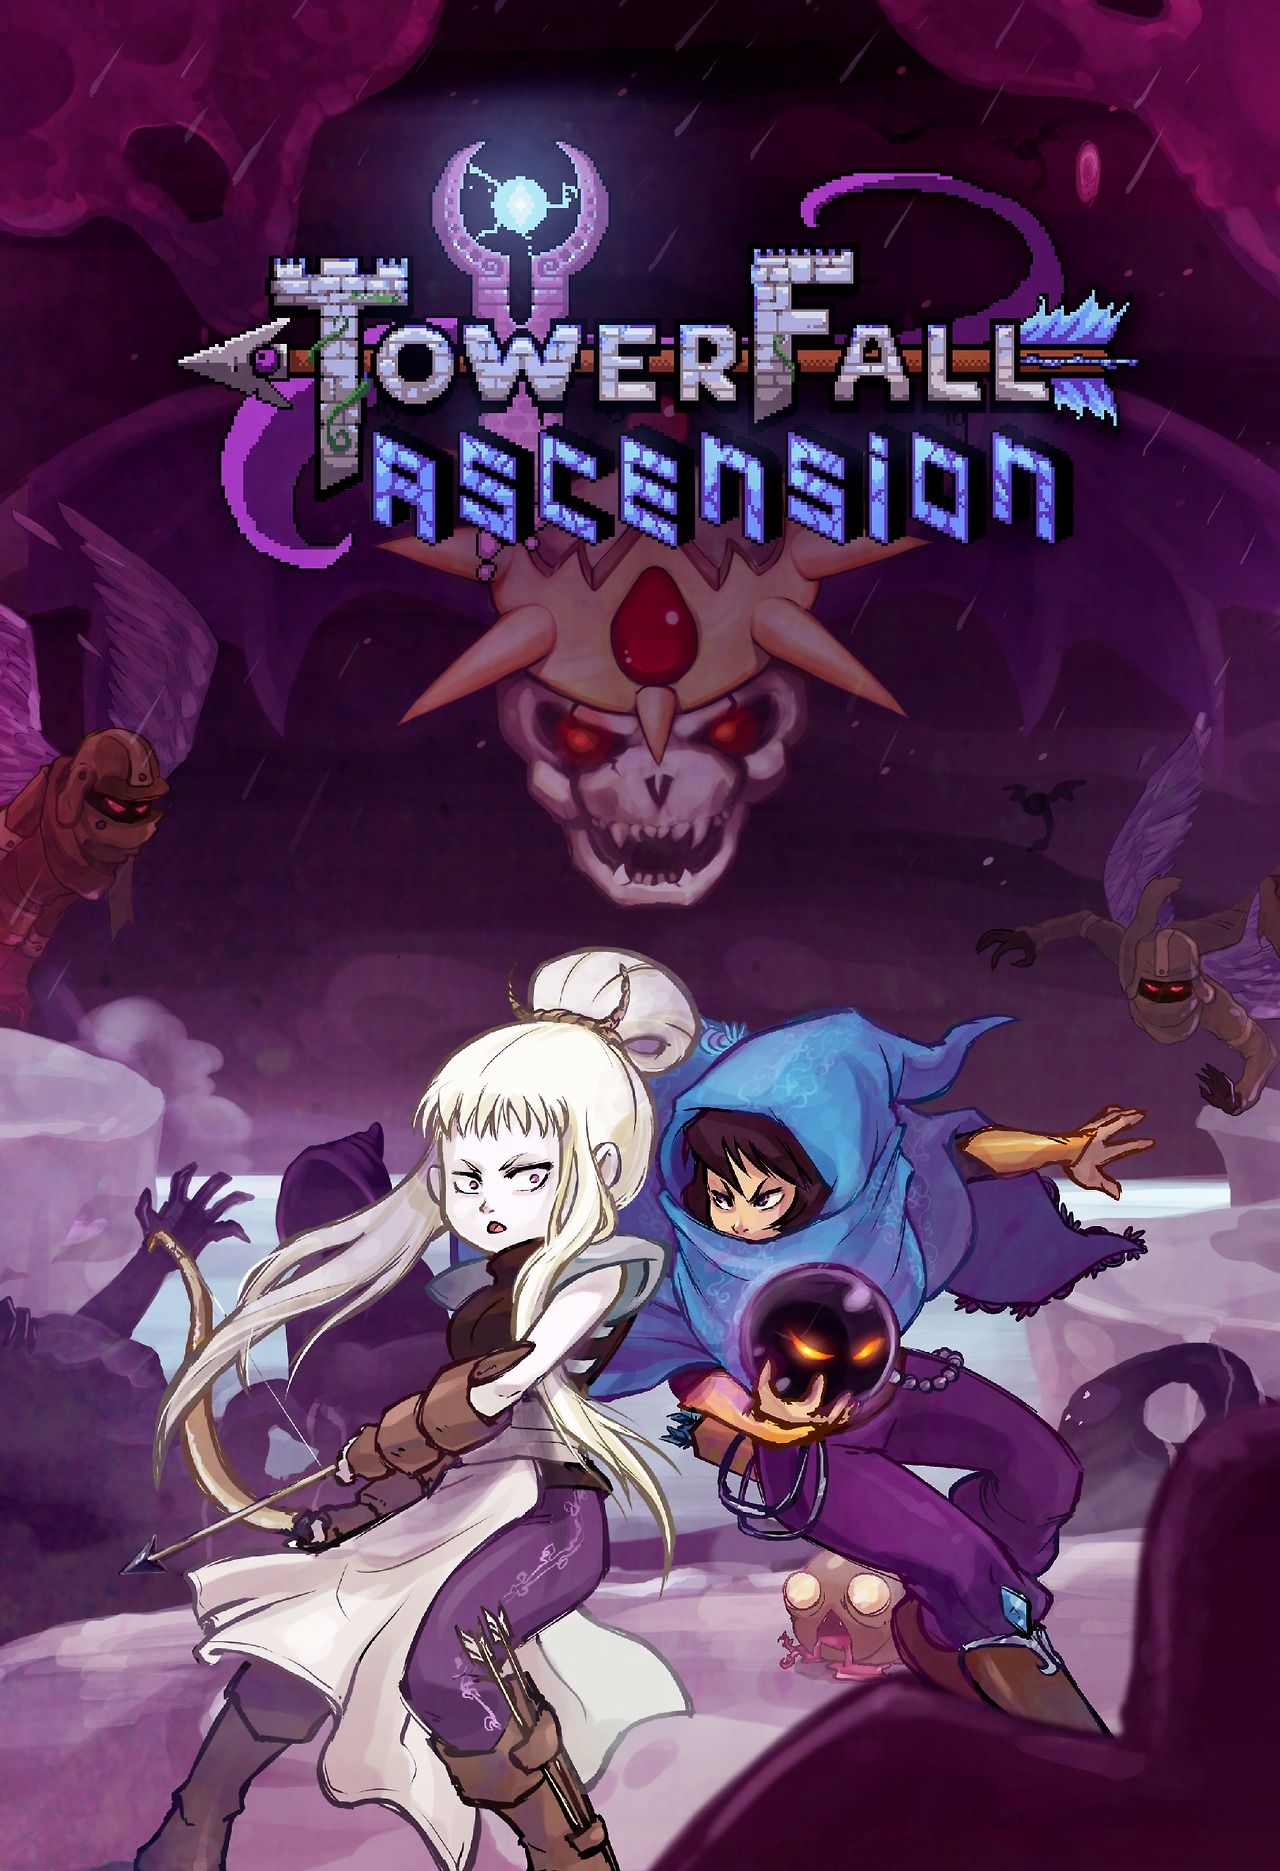 Towerfall Ascension Poster Art Fanning Video Game